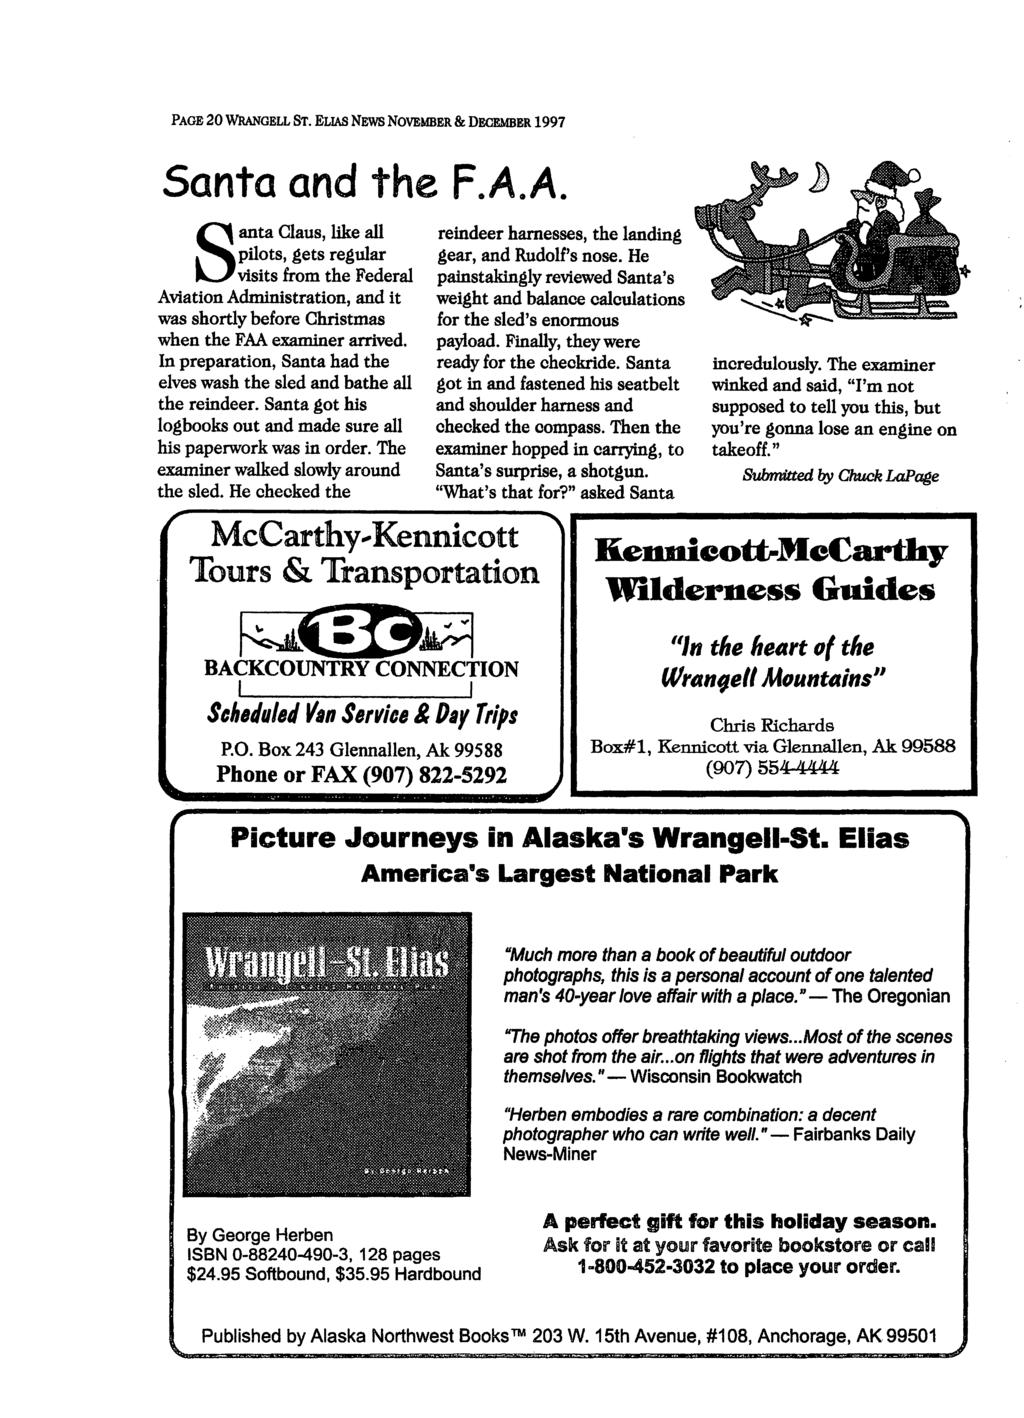 PAGE 20 WRANGELL ST. ELIAS NEWS NOVEMBER & DECEMBER 1997 Santa and the F.A.A. Santa Claus, like all puots, gets regular visits from the Federal Aviation Administration, and it was shortly before Christmas when the FAA examiner arrived.